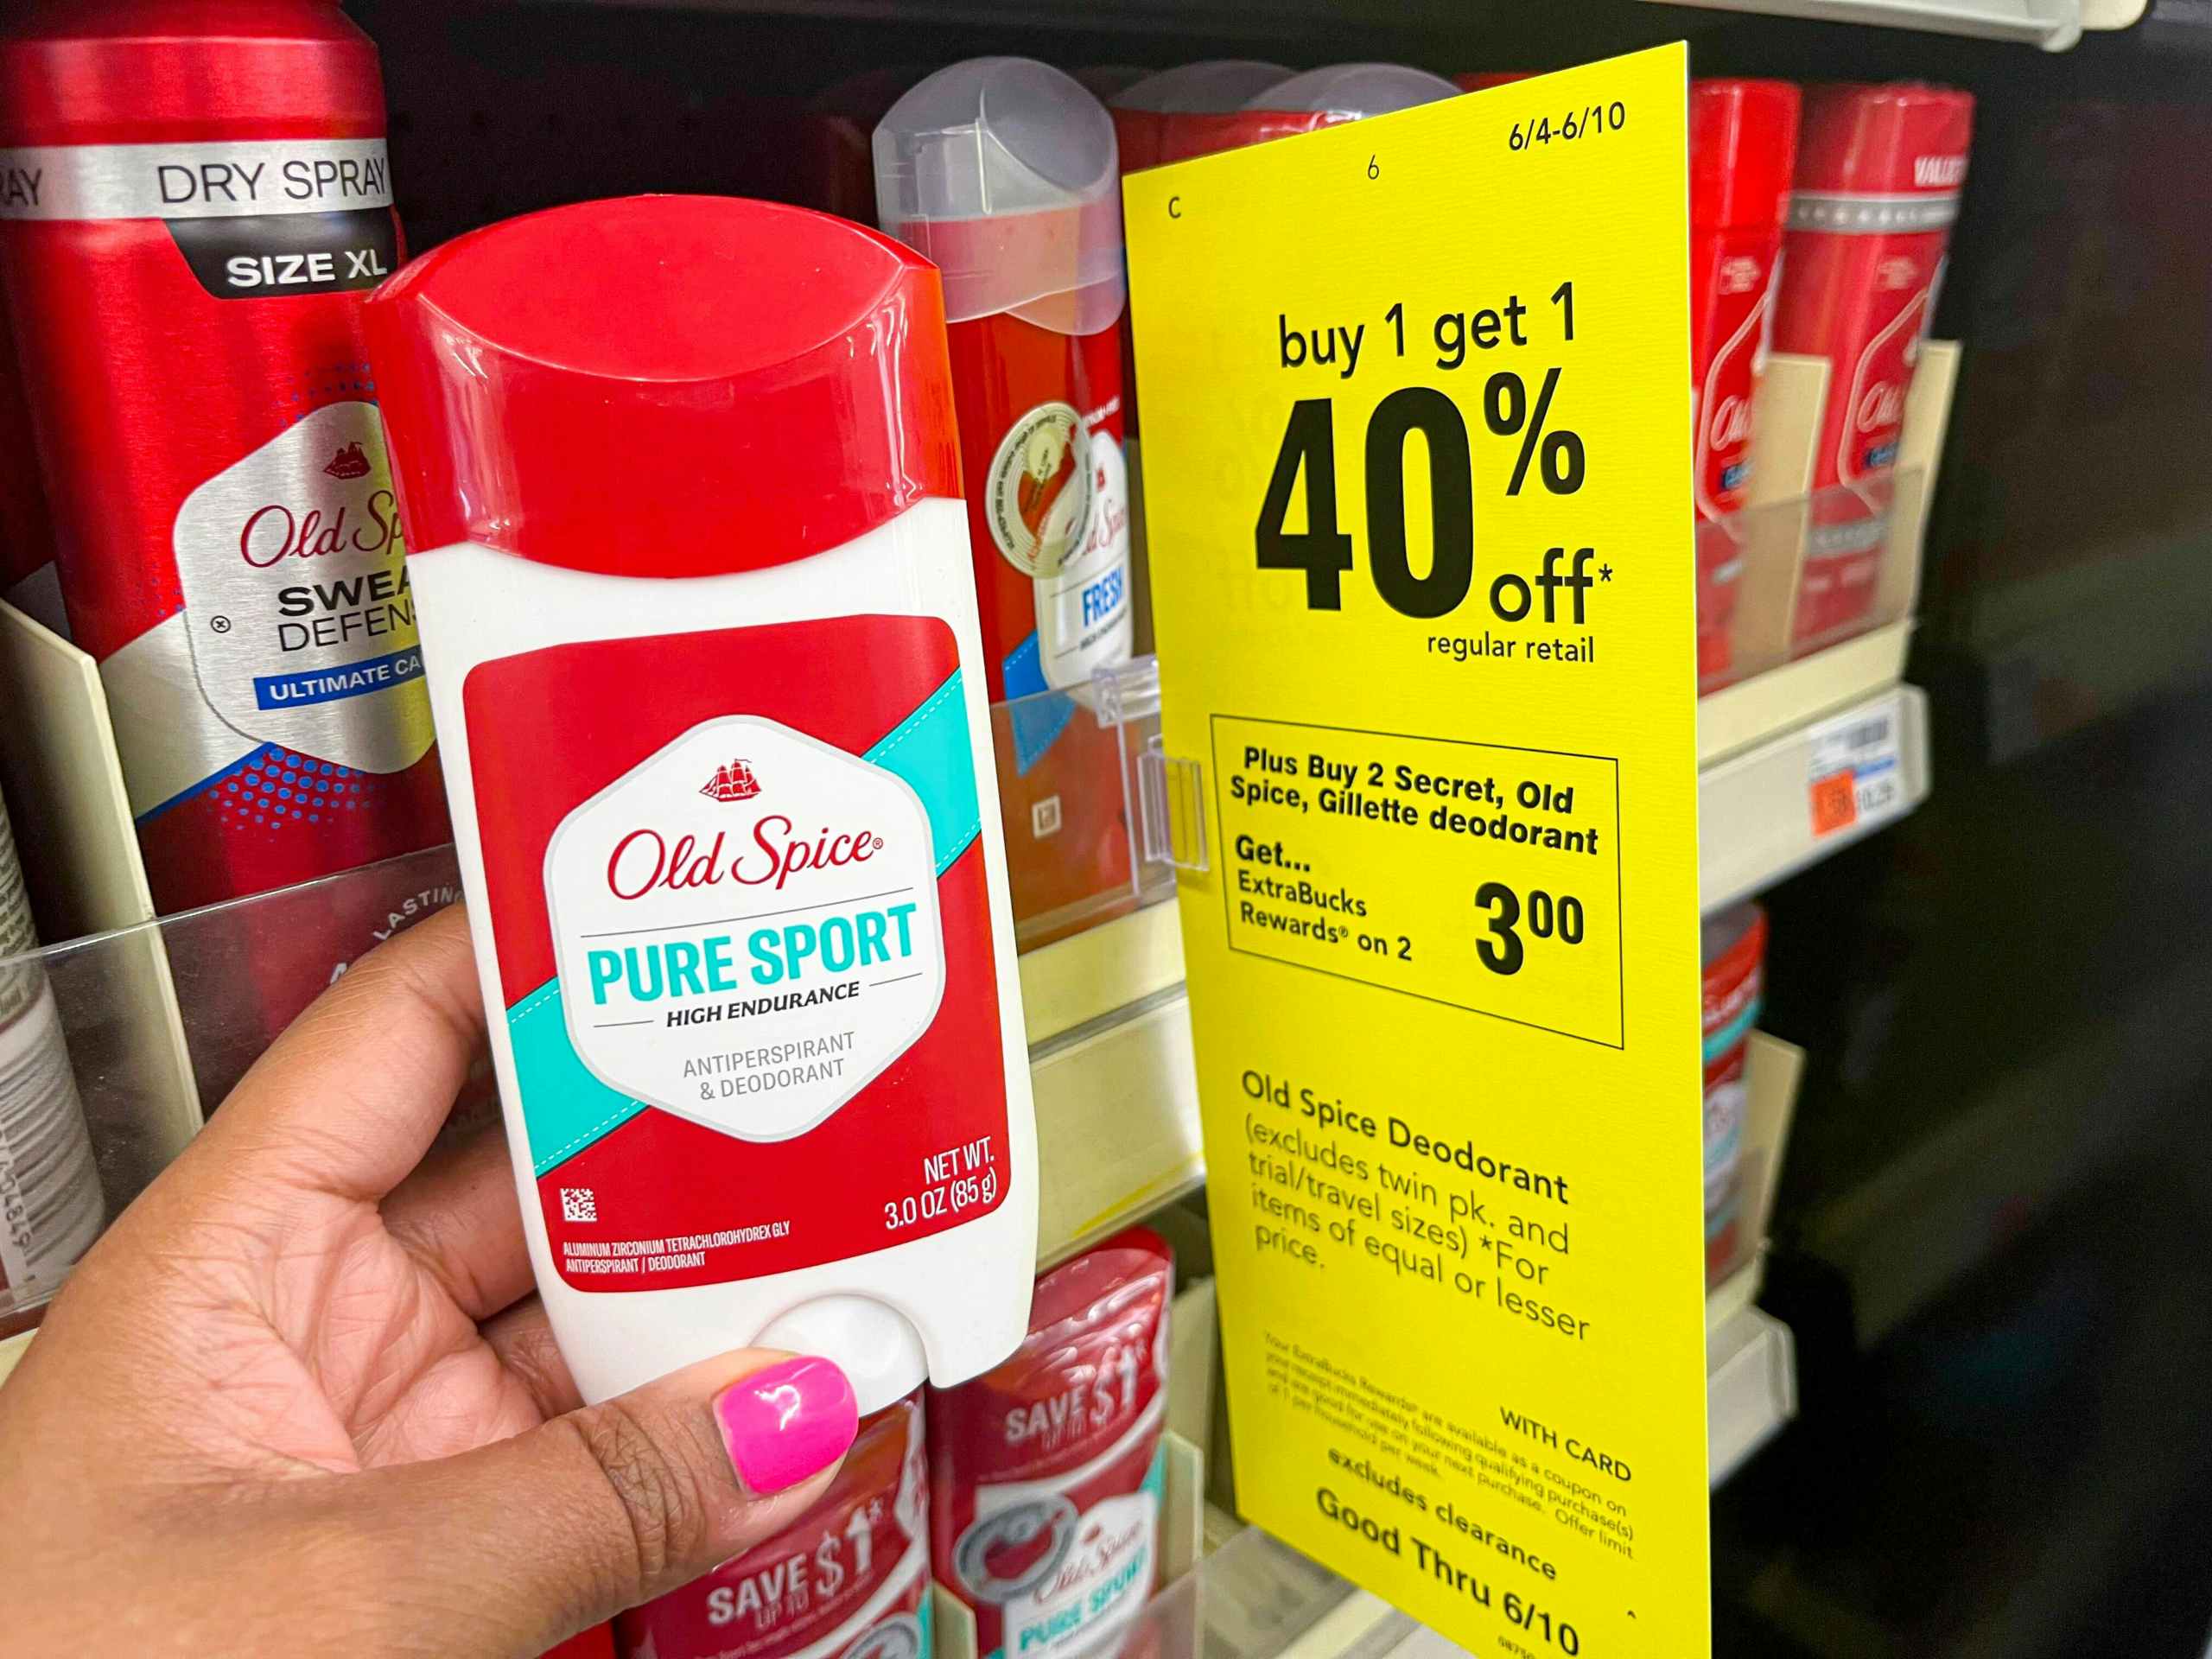 hand holding Old Spice Pure Sport deodorant next to sales tag